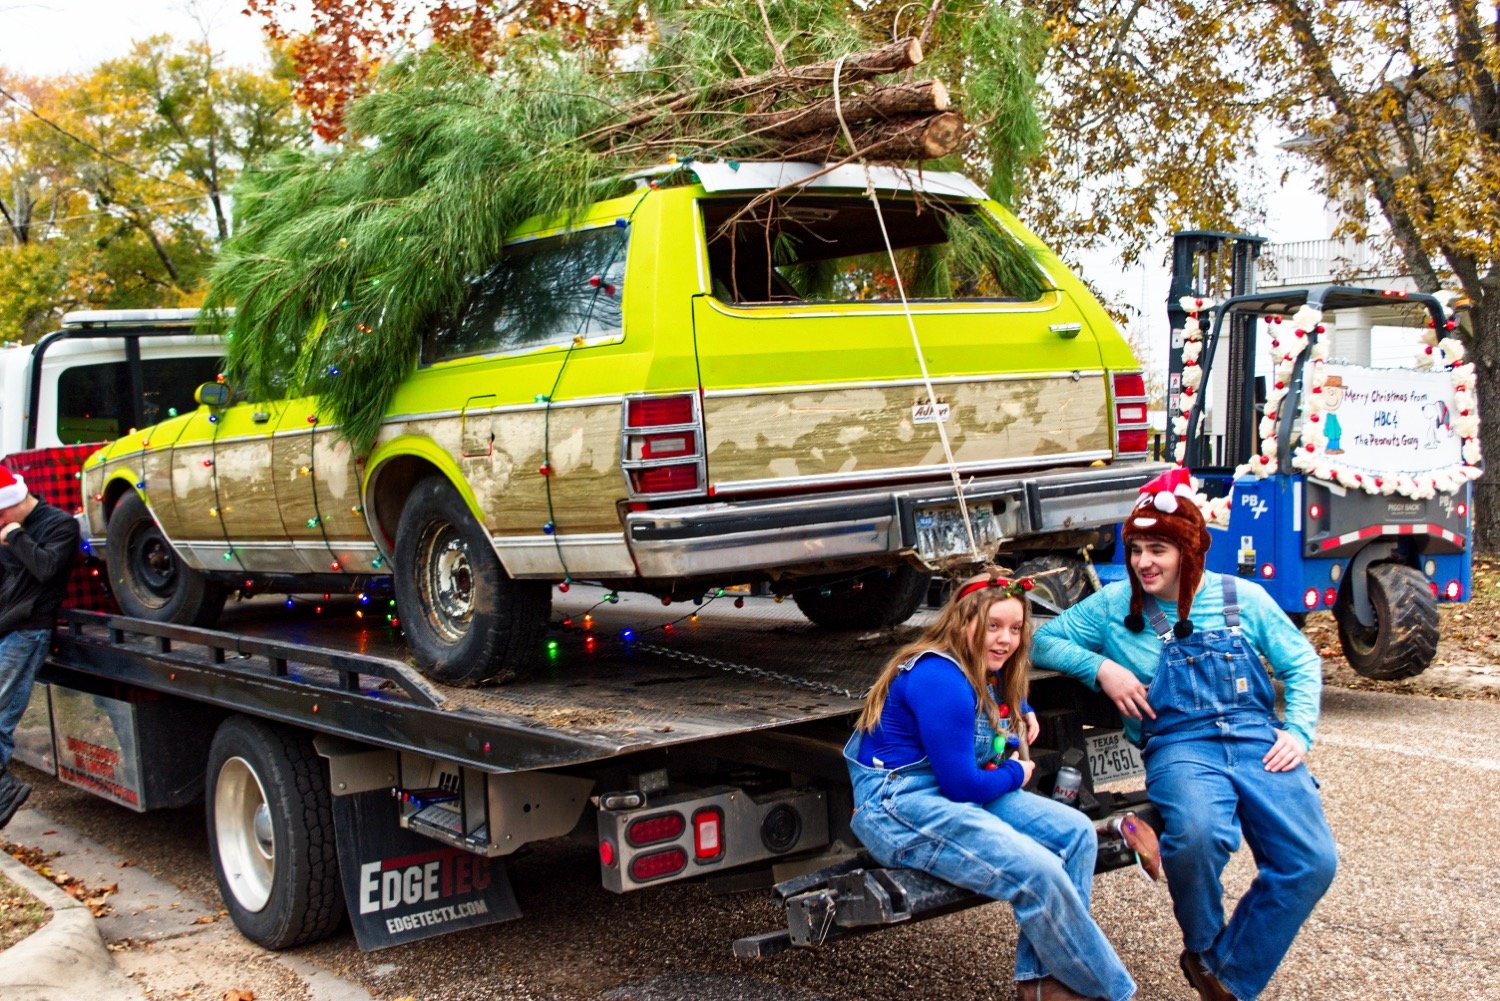 The Griswolds’ “Christmas Vacation” float by Wyatt’s Towing won second place in the Mineola parade.